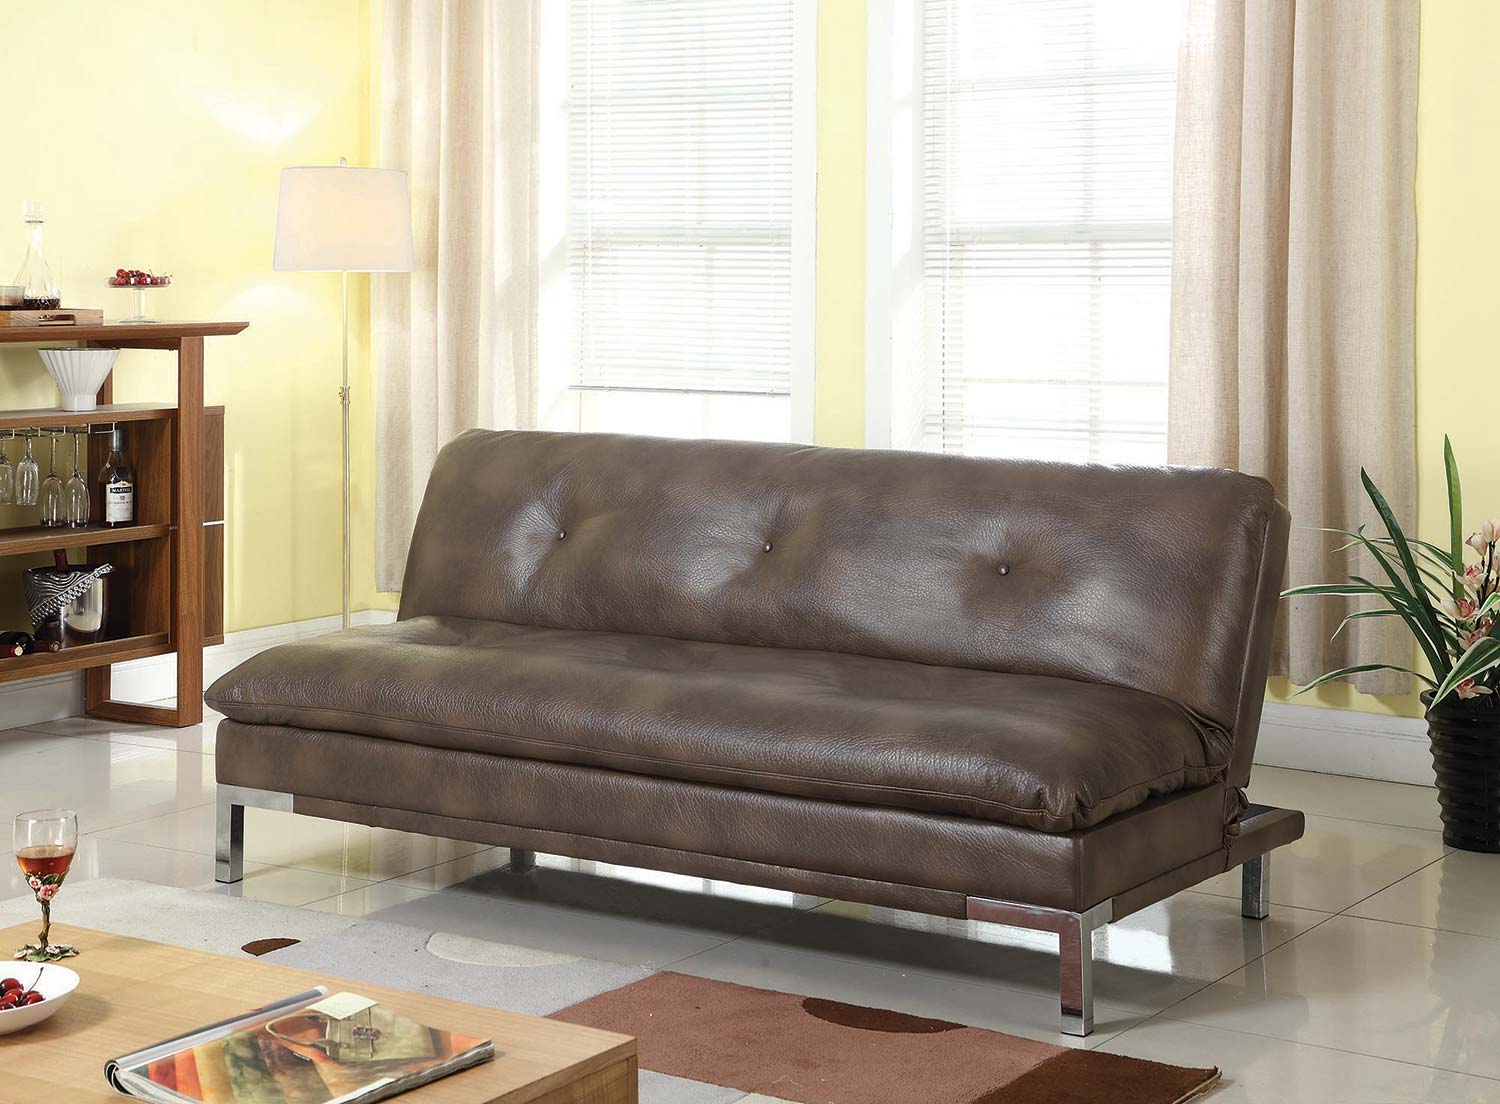 Coaster 300681 Sofa Bed - Two-tone Brown